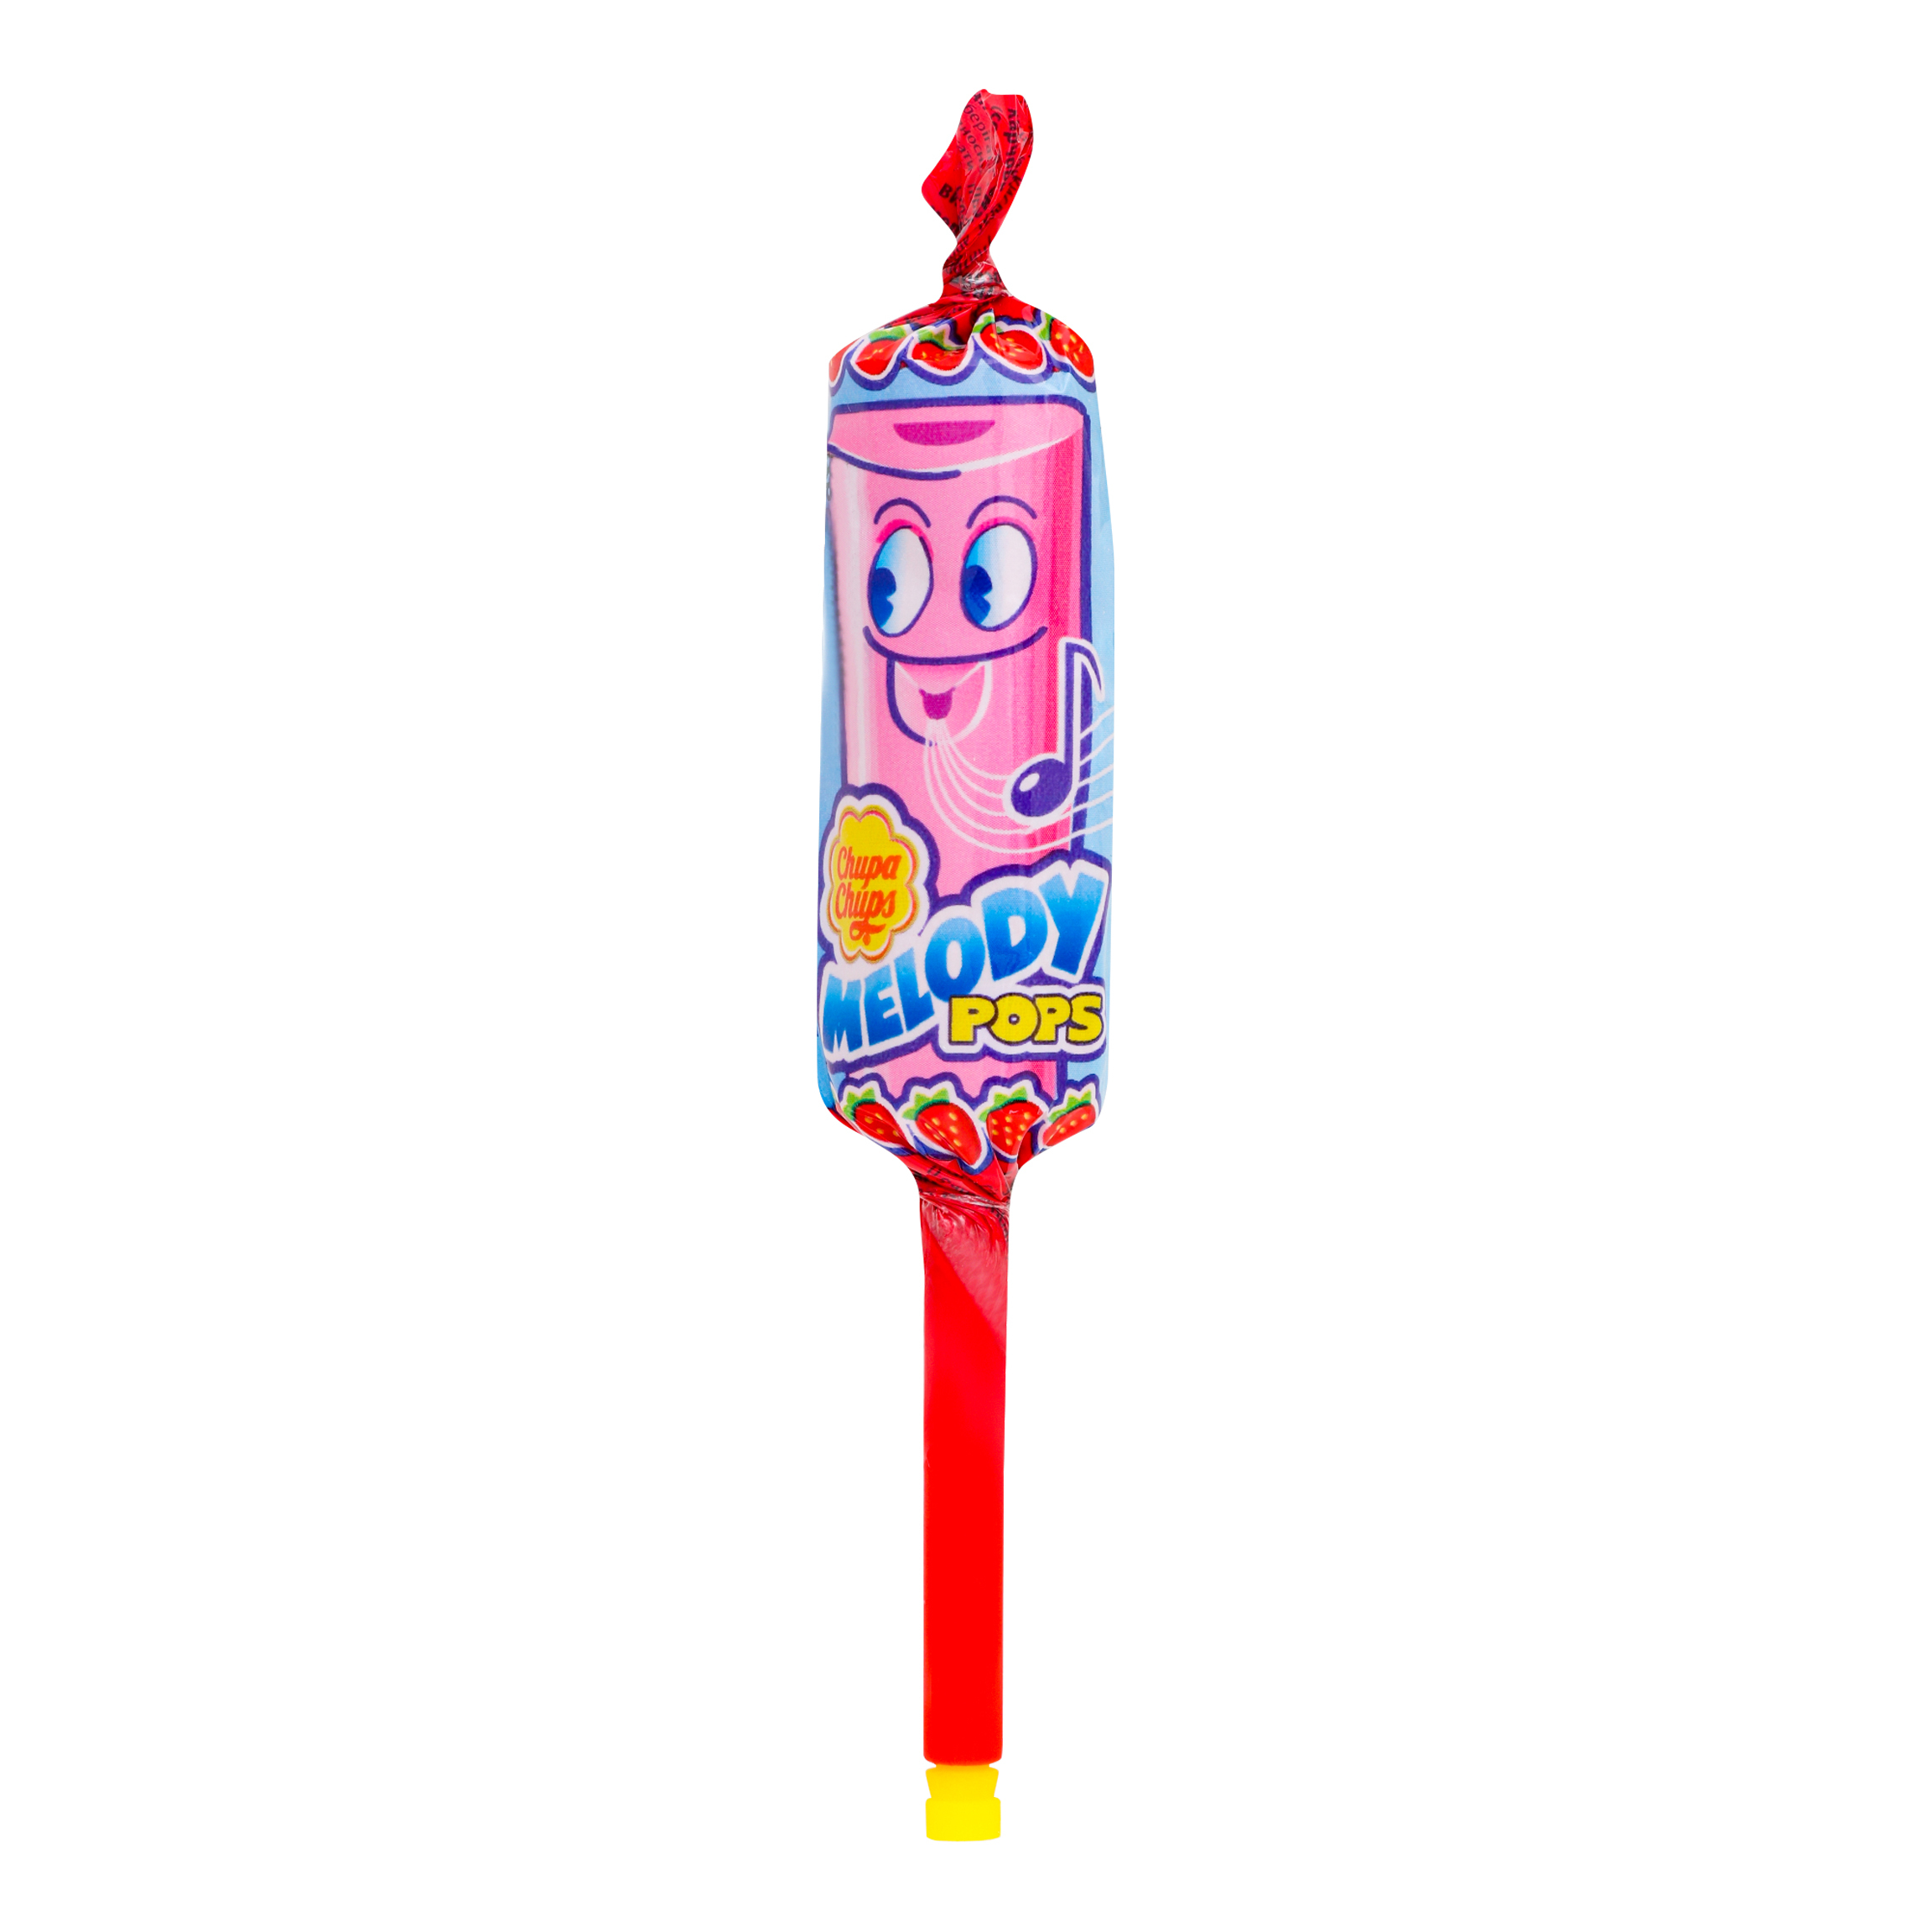 Chupa Chups Melody Pops with strawberry flavor lollipop 15g